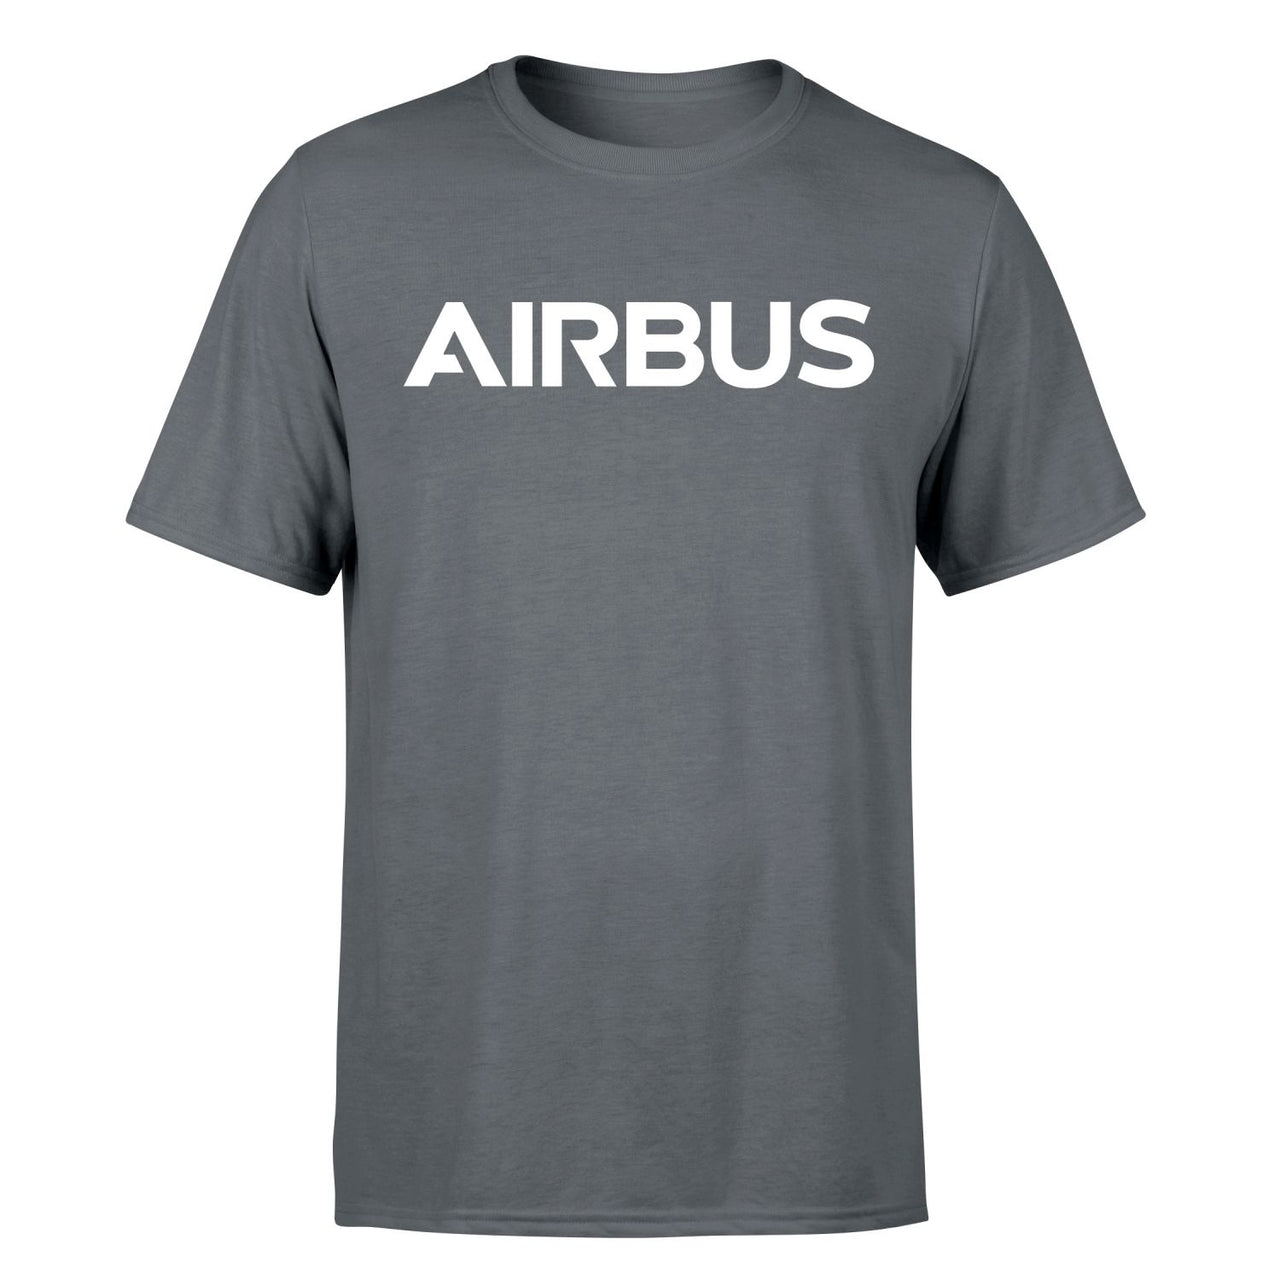 Airbus & Text Designed T-Shirts